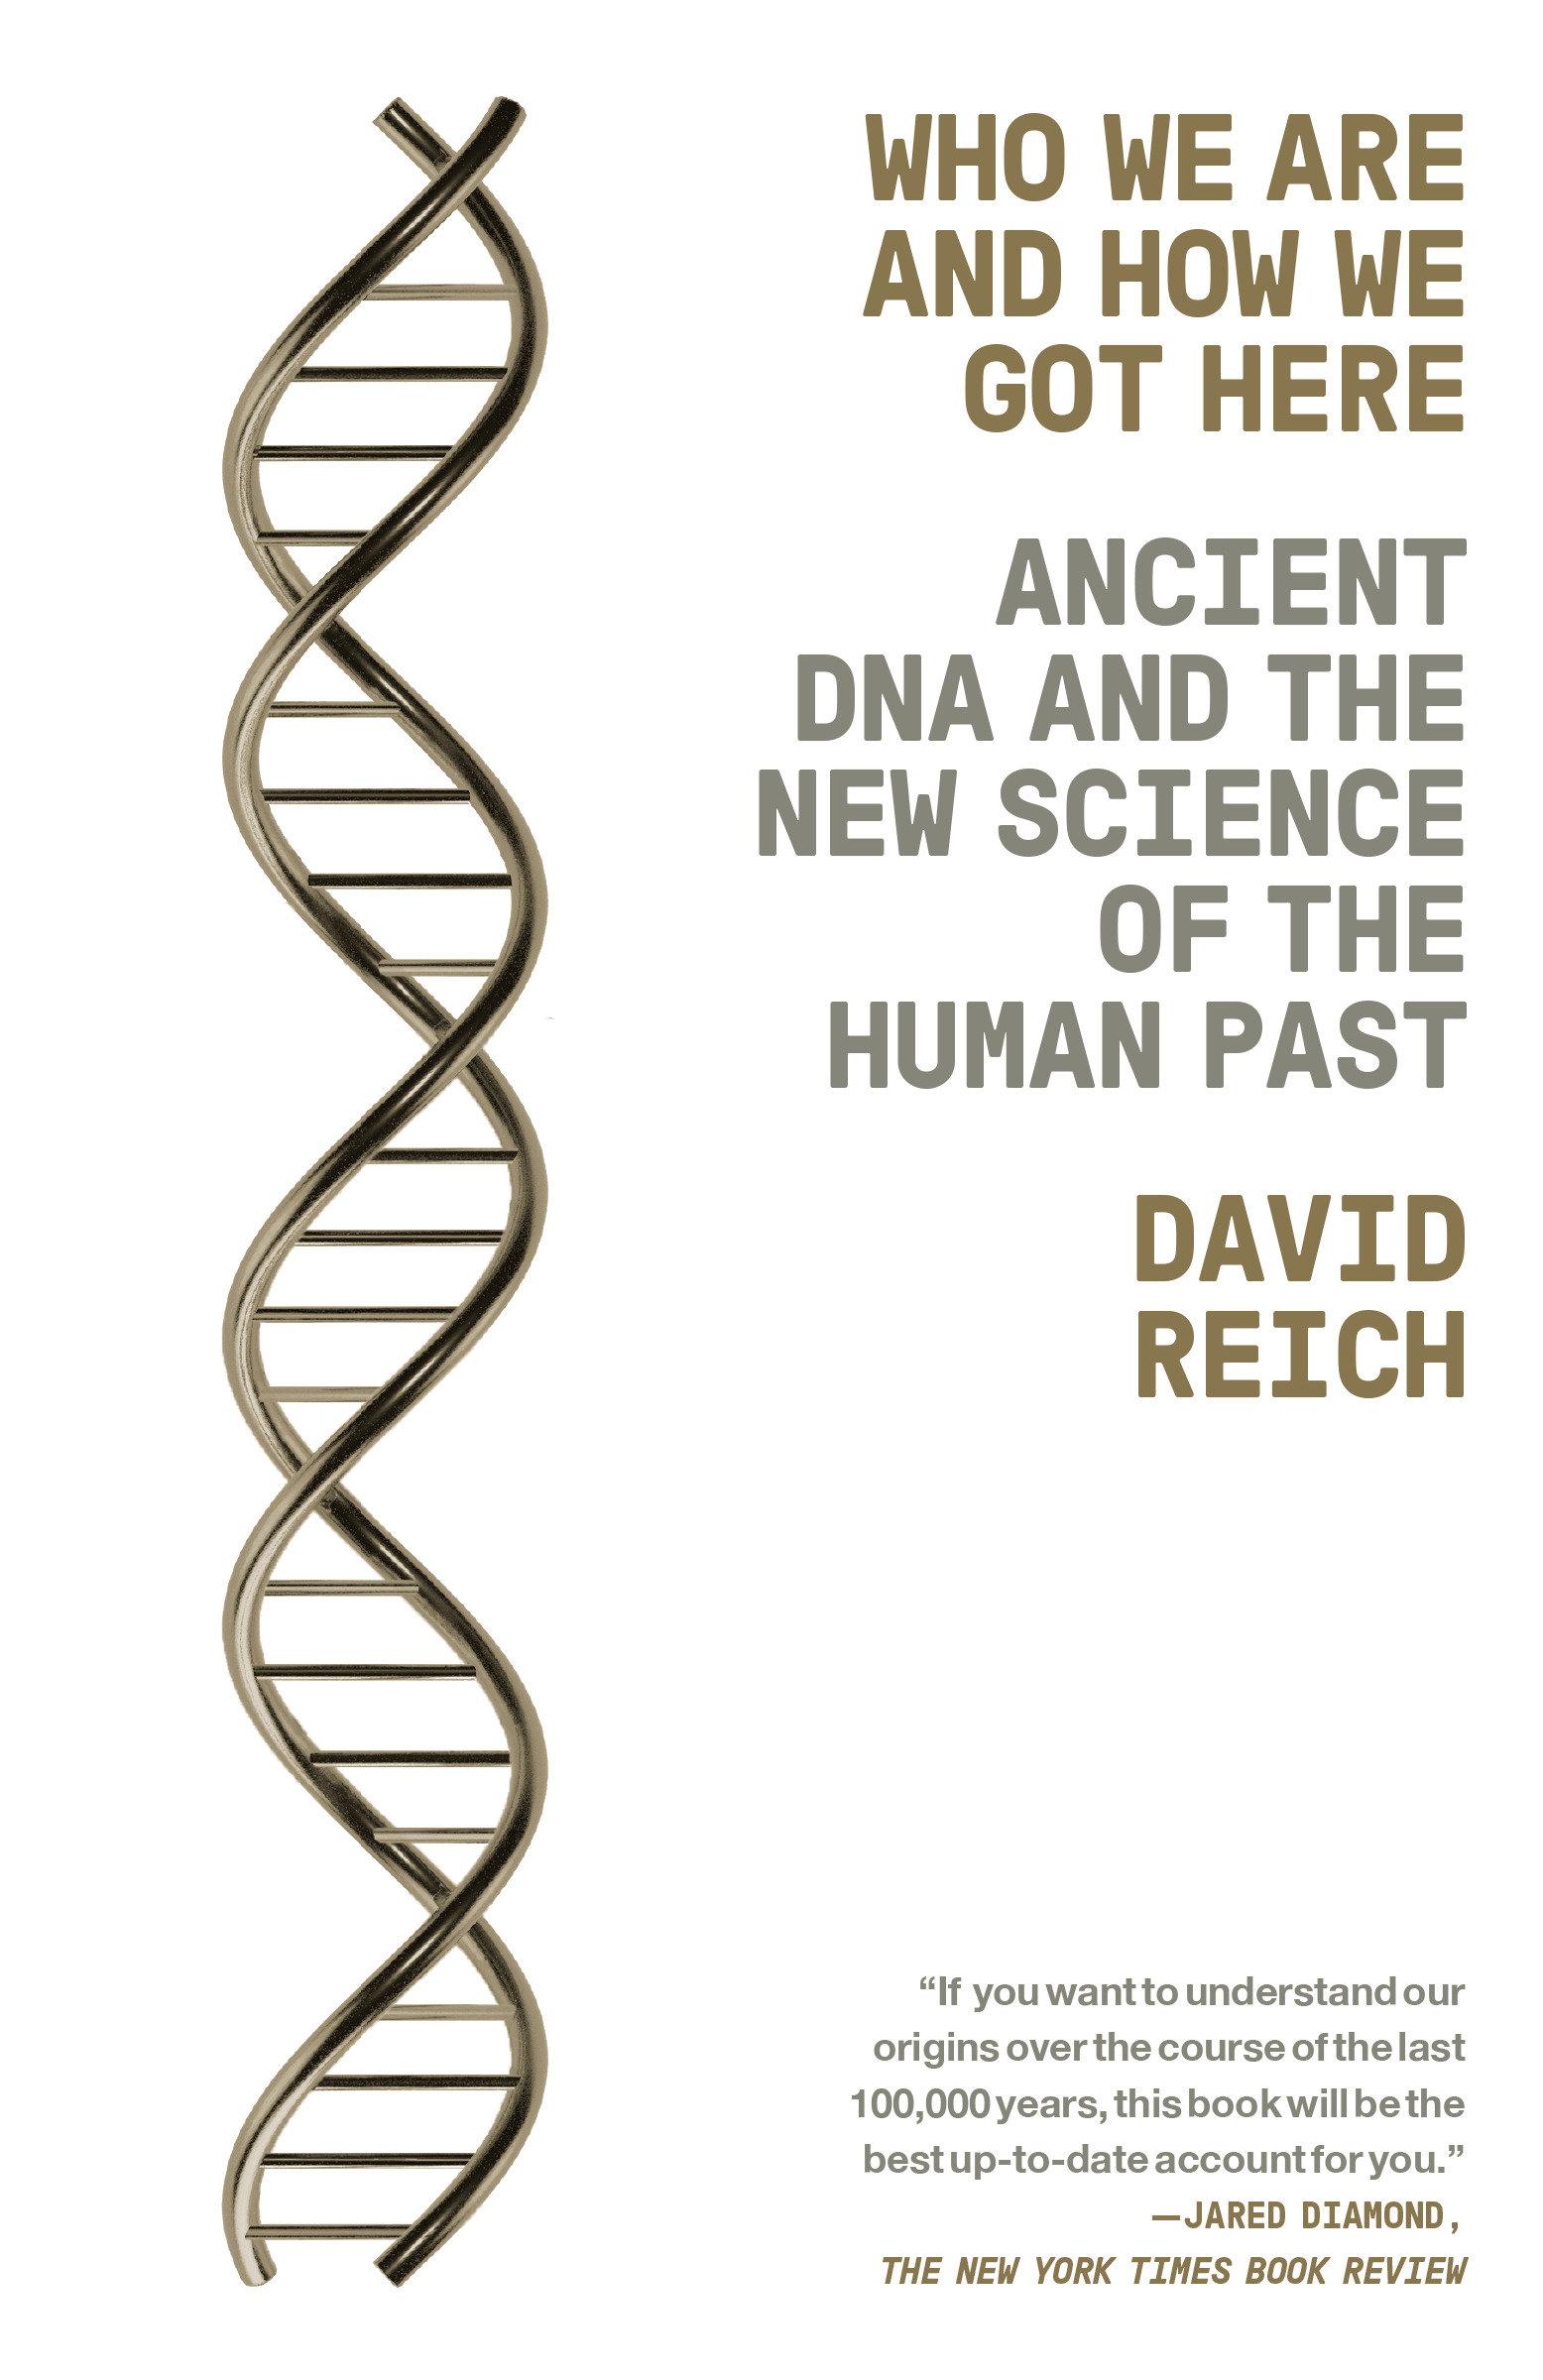 Who We Are and How We Got Here | Ancient DNA and the New Science of the Human Past | David Reich | Taschenbuch | 368 S. | Englisch | 2019 | Random House LLC US | EAN 9781101873465 - Reich, David